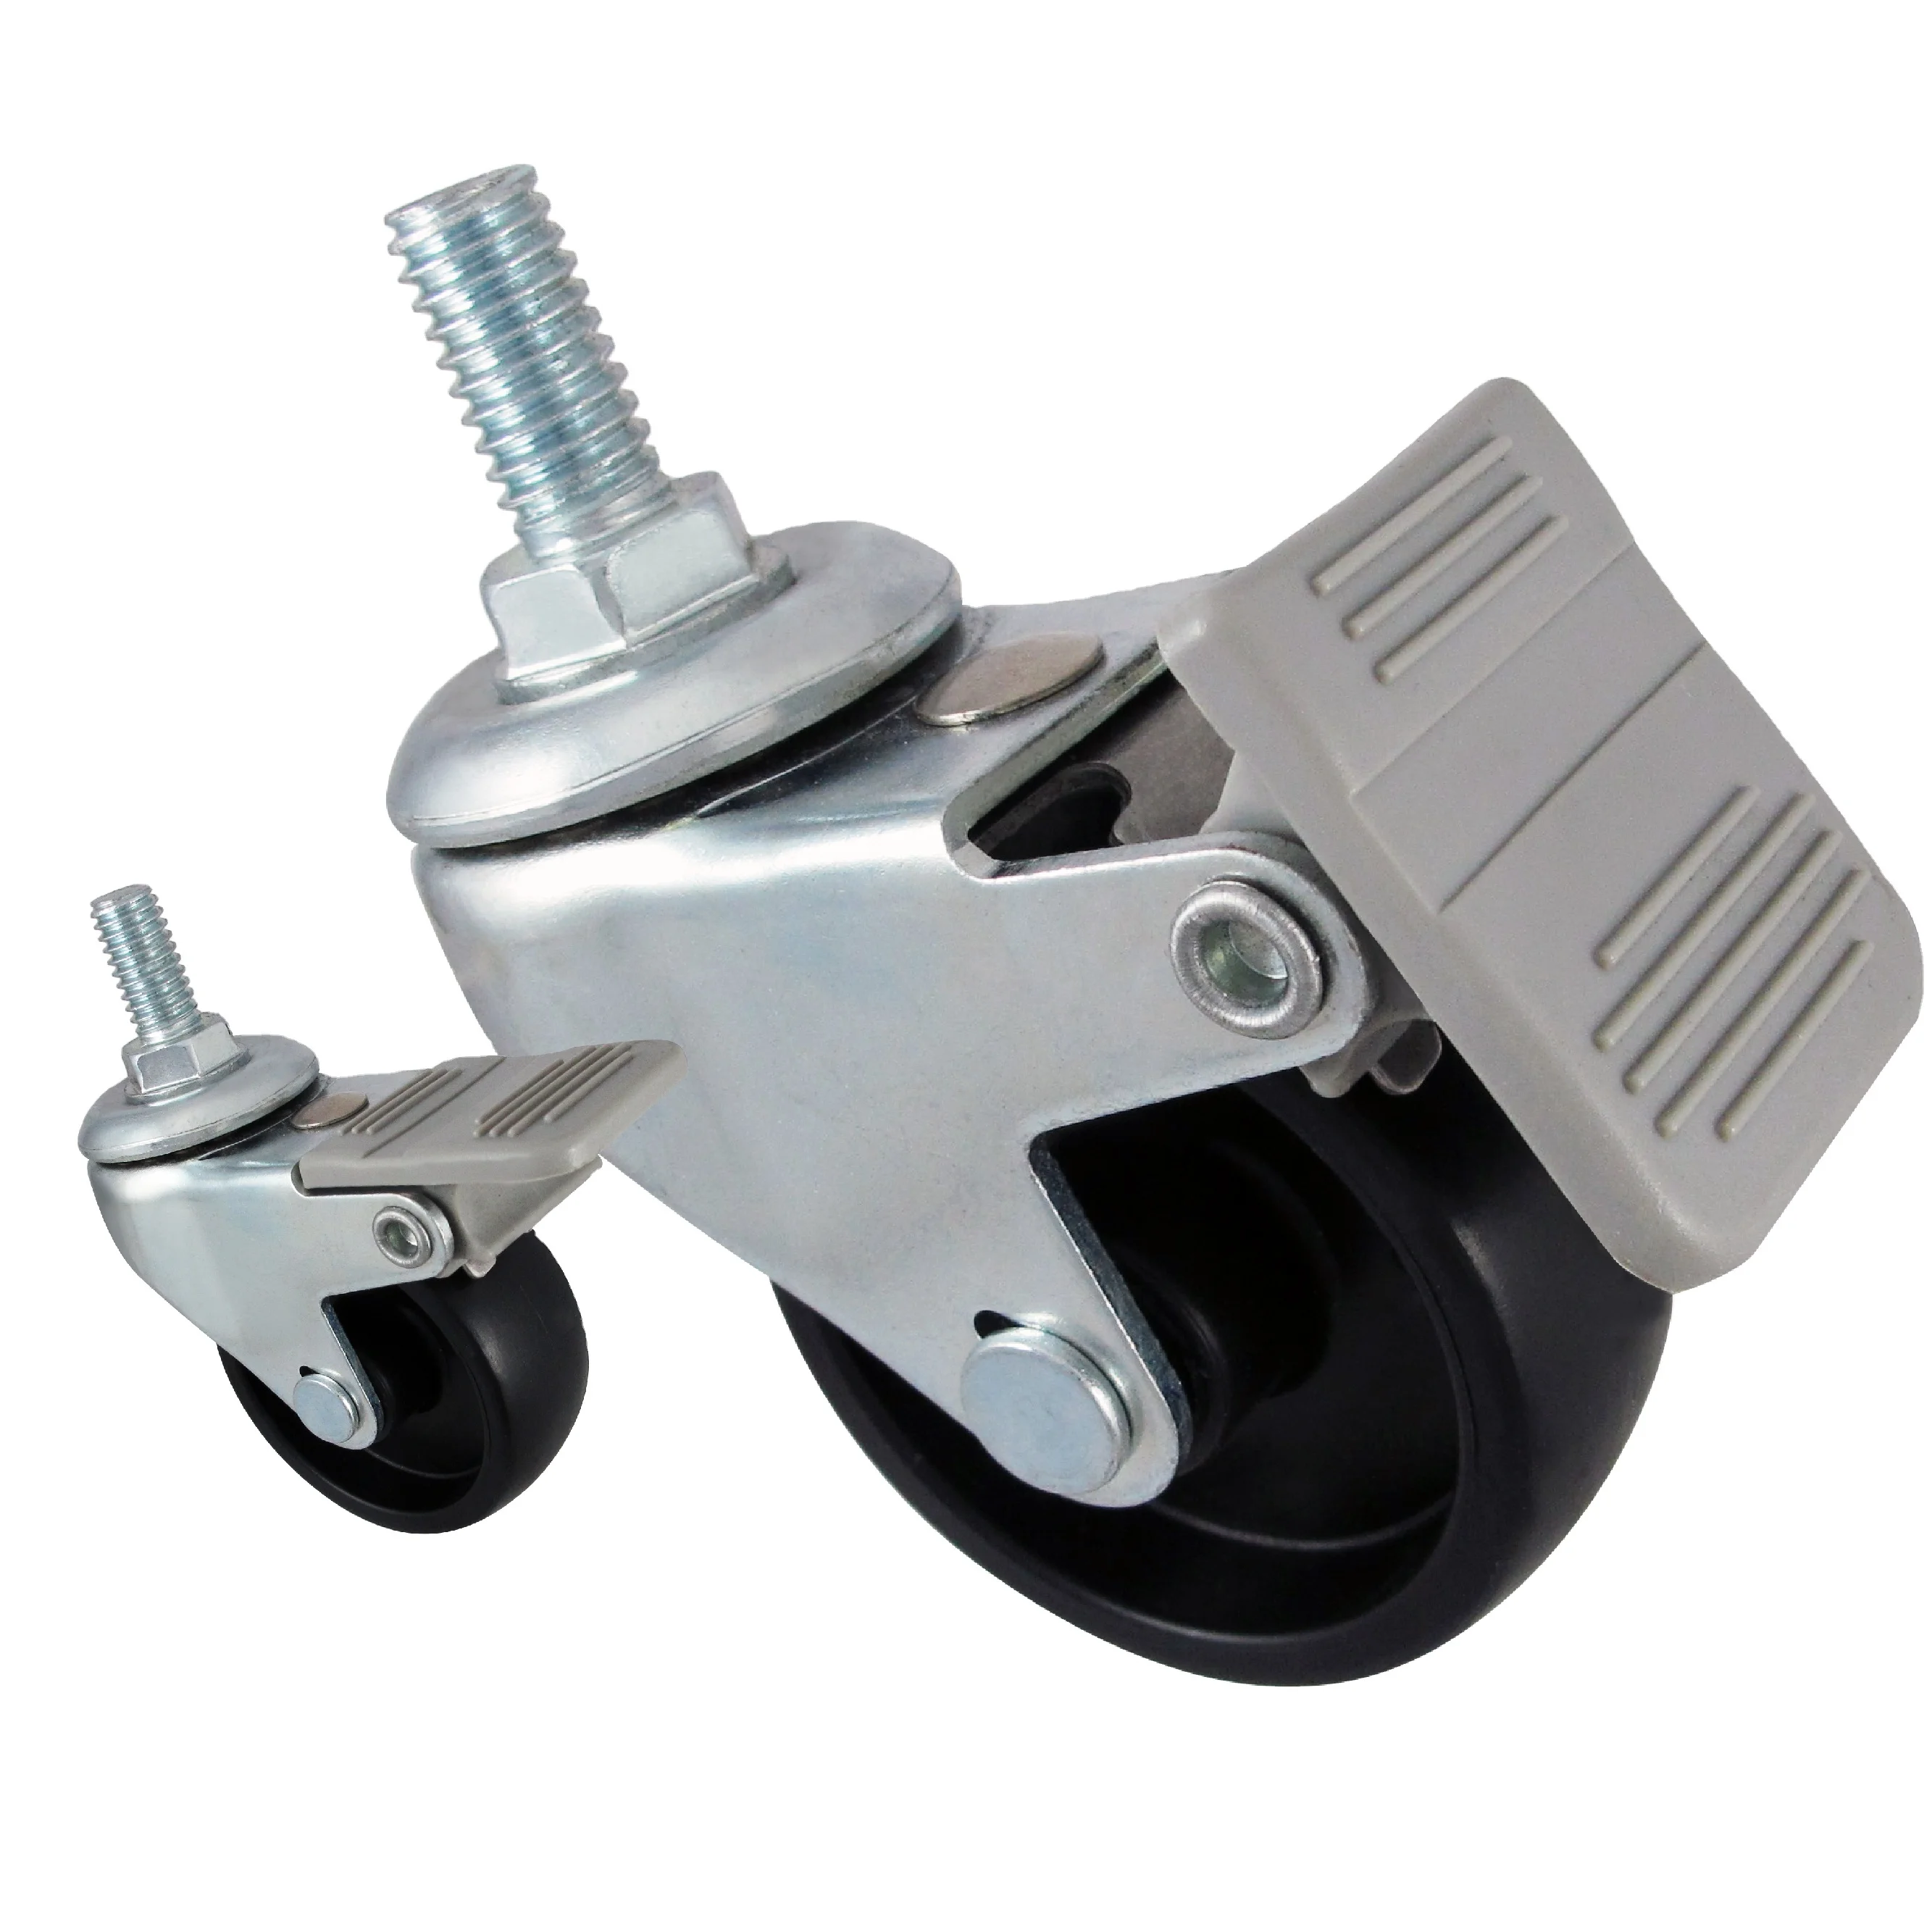 Furniture Caster Wheels - Buy Furniture Caster Wheels,2 Inch Pp Casters  With Brake,50mm 3/8 Dia Stem Casters Product on Alibaba.com